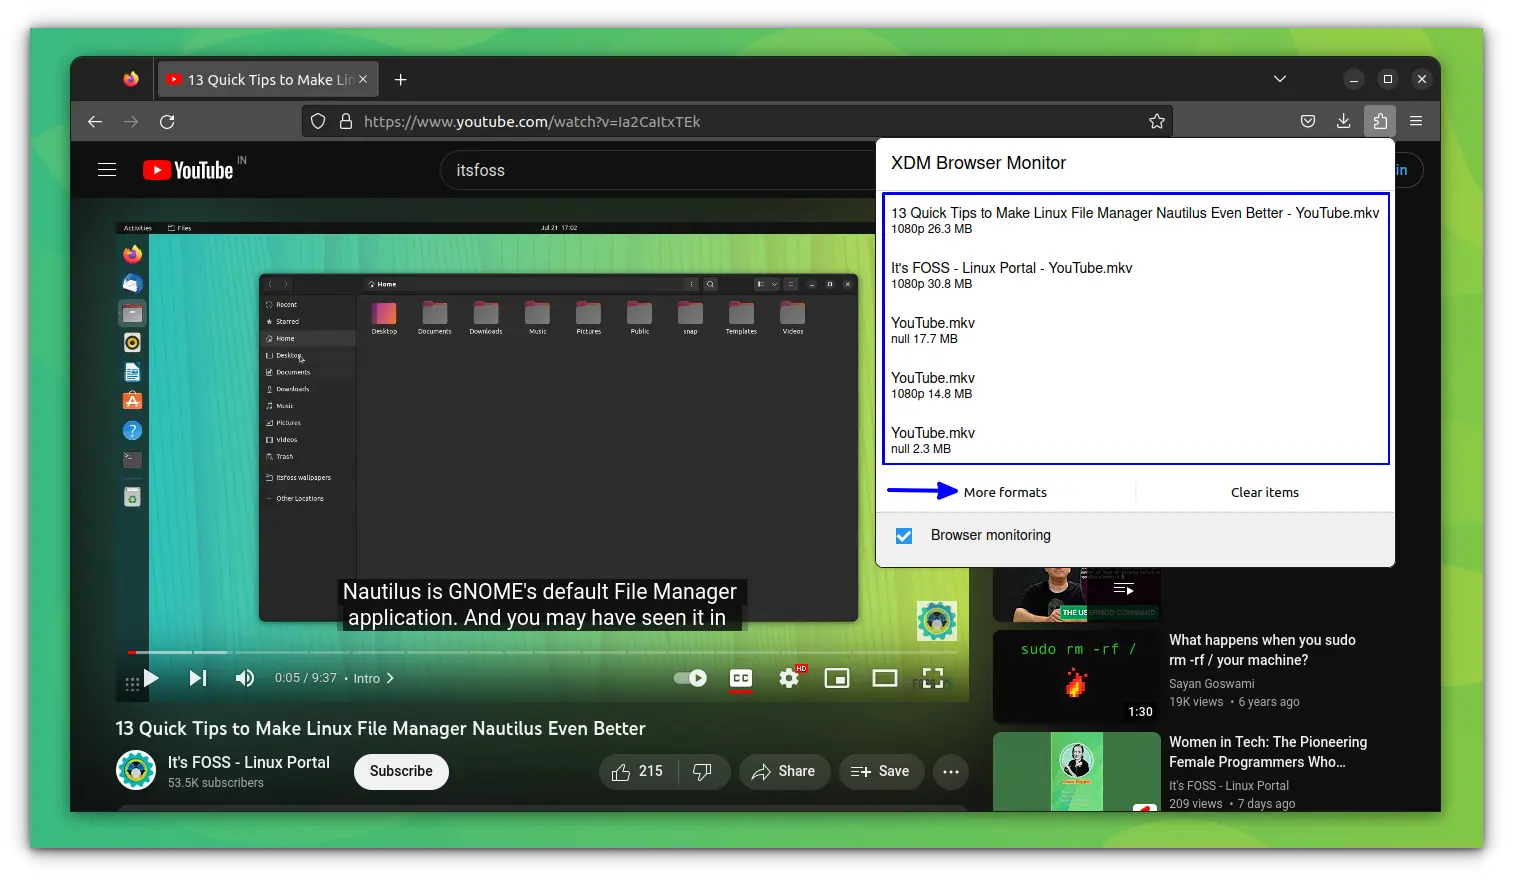 Xtreme Download Manager Extension showing available video formats to download